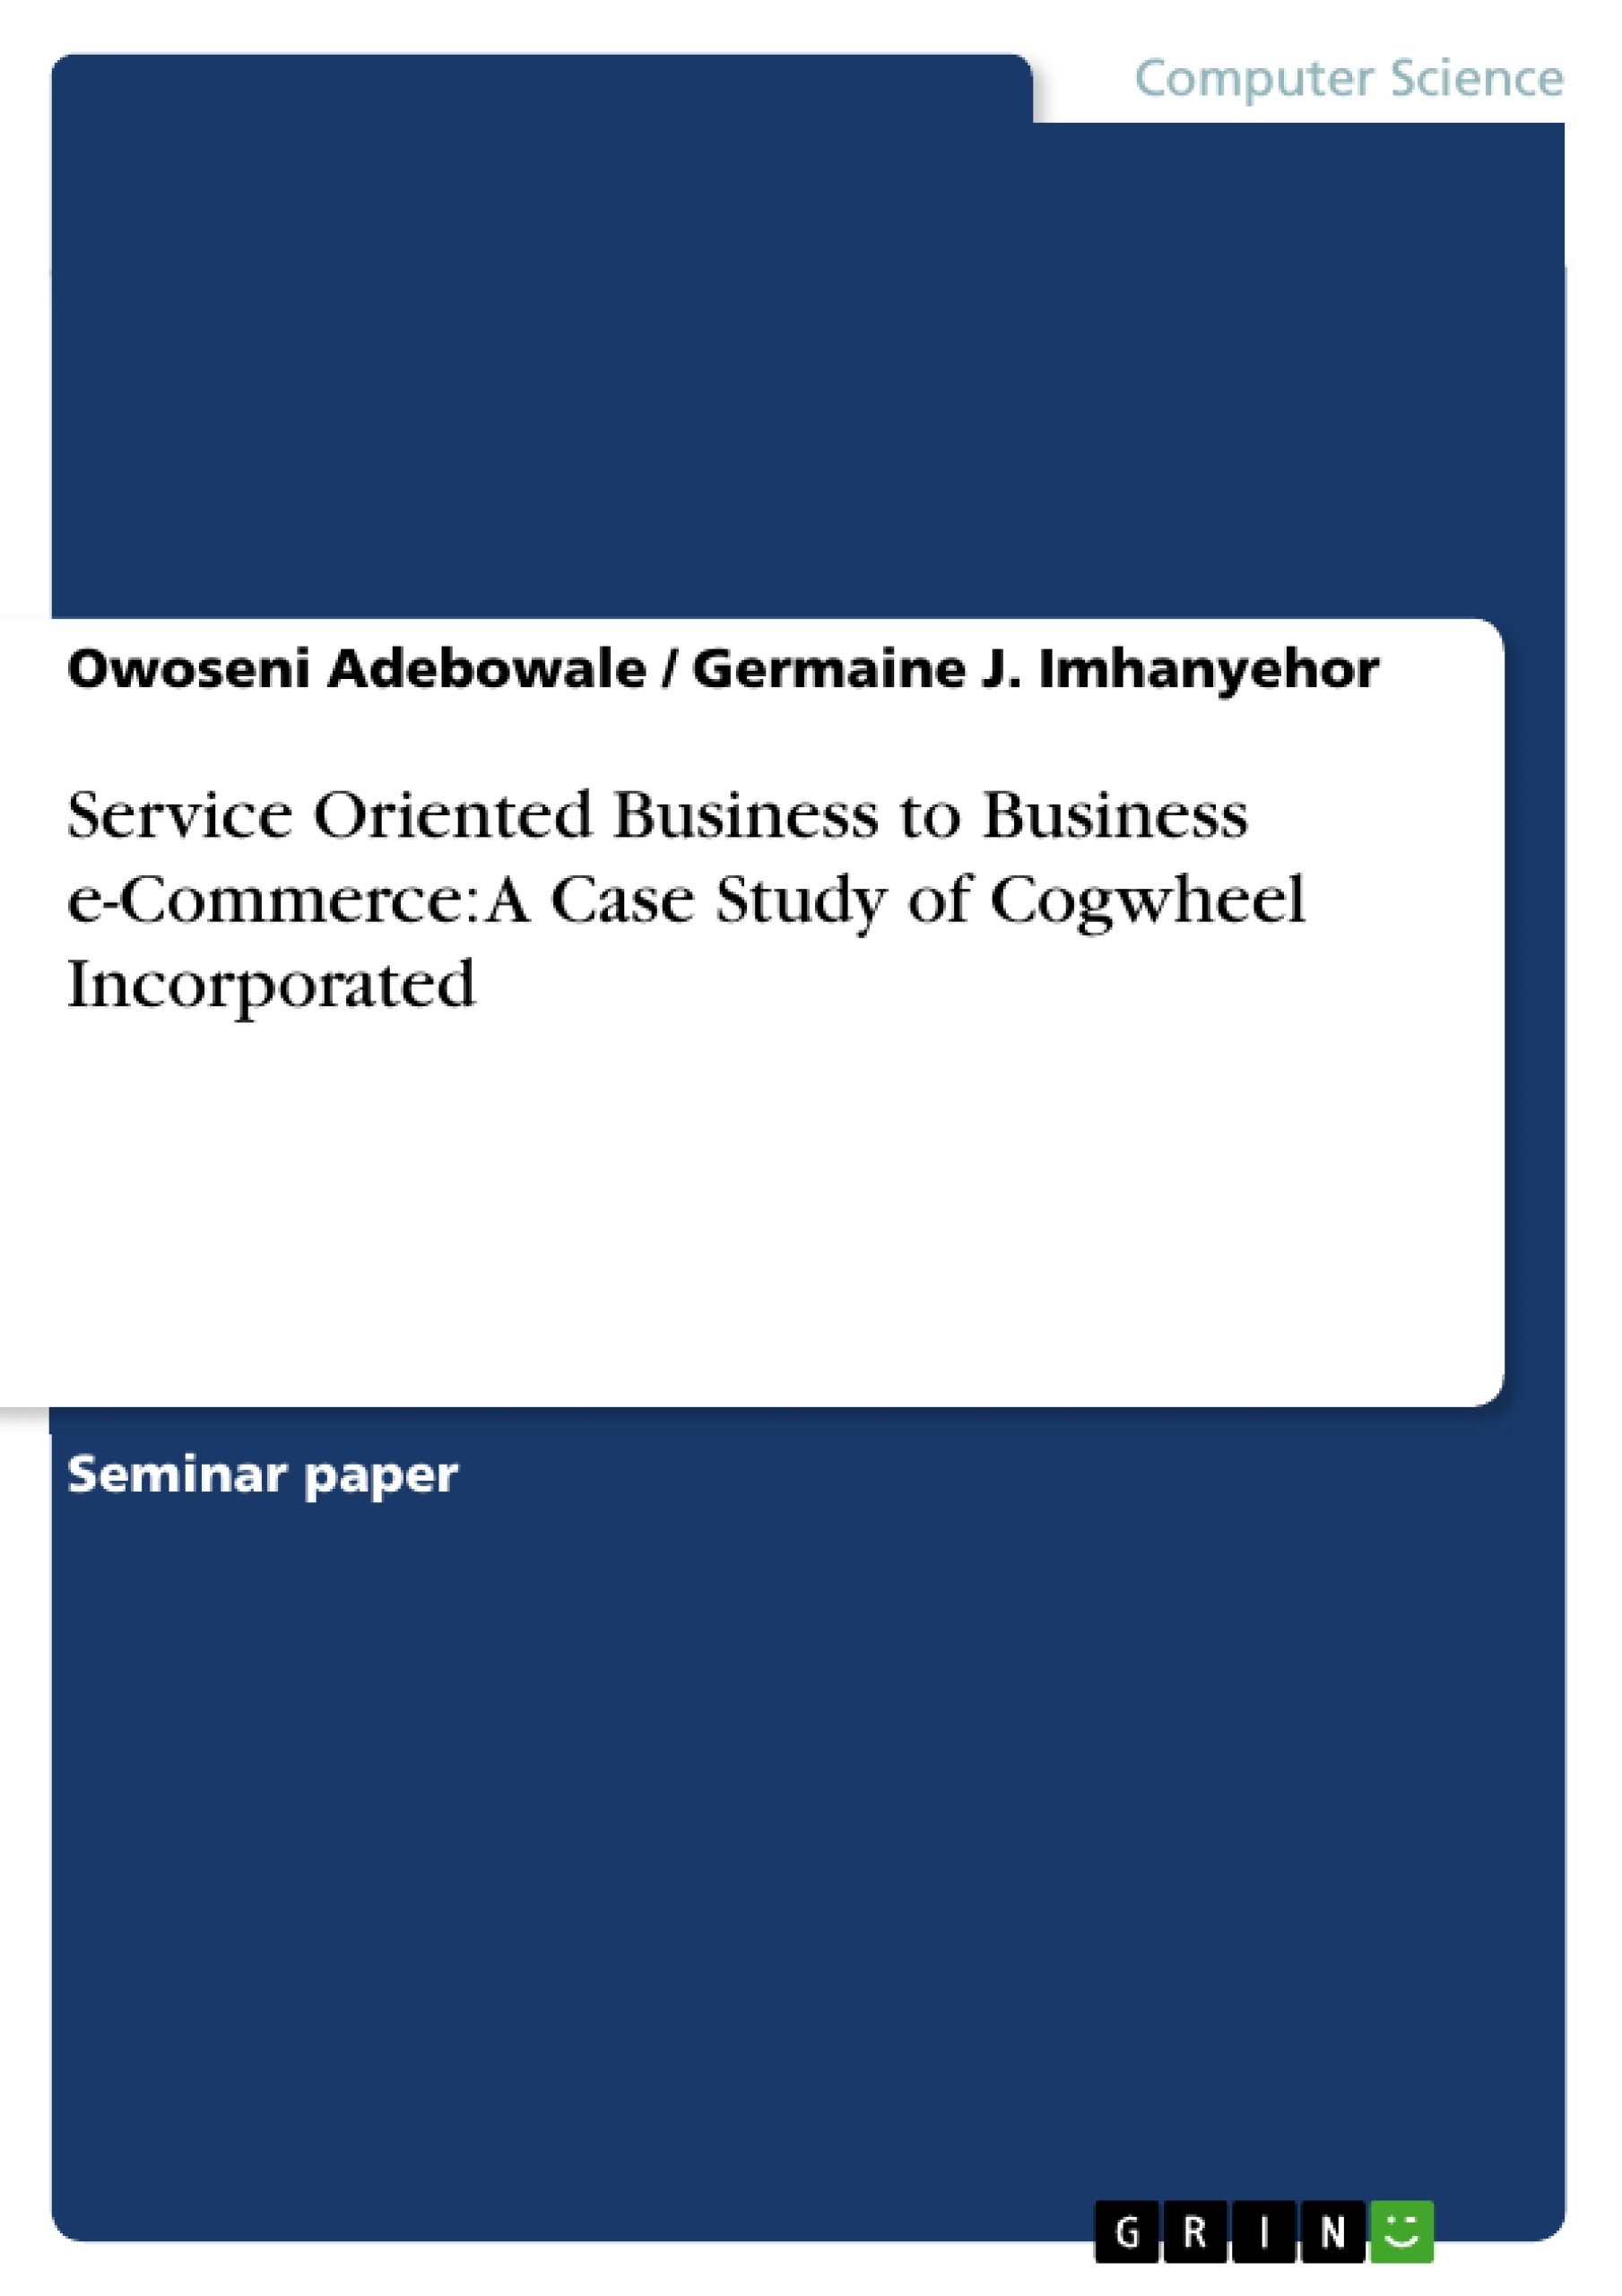 Title: Service Oriented Business to Business e-Commerce: A Case Study of Cogwheel Incorporated